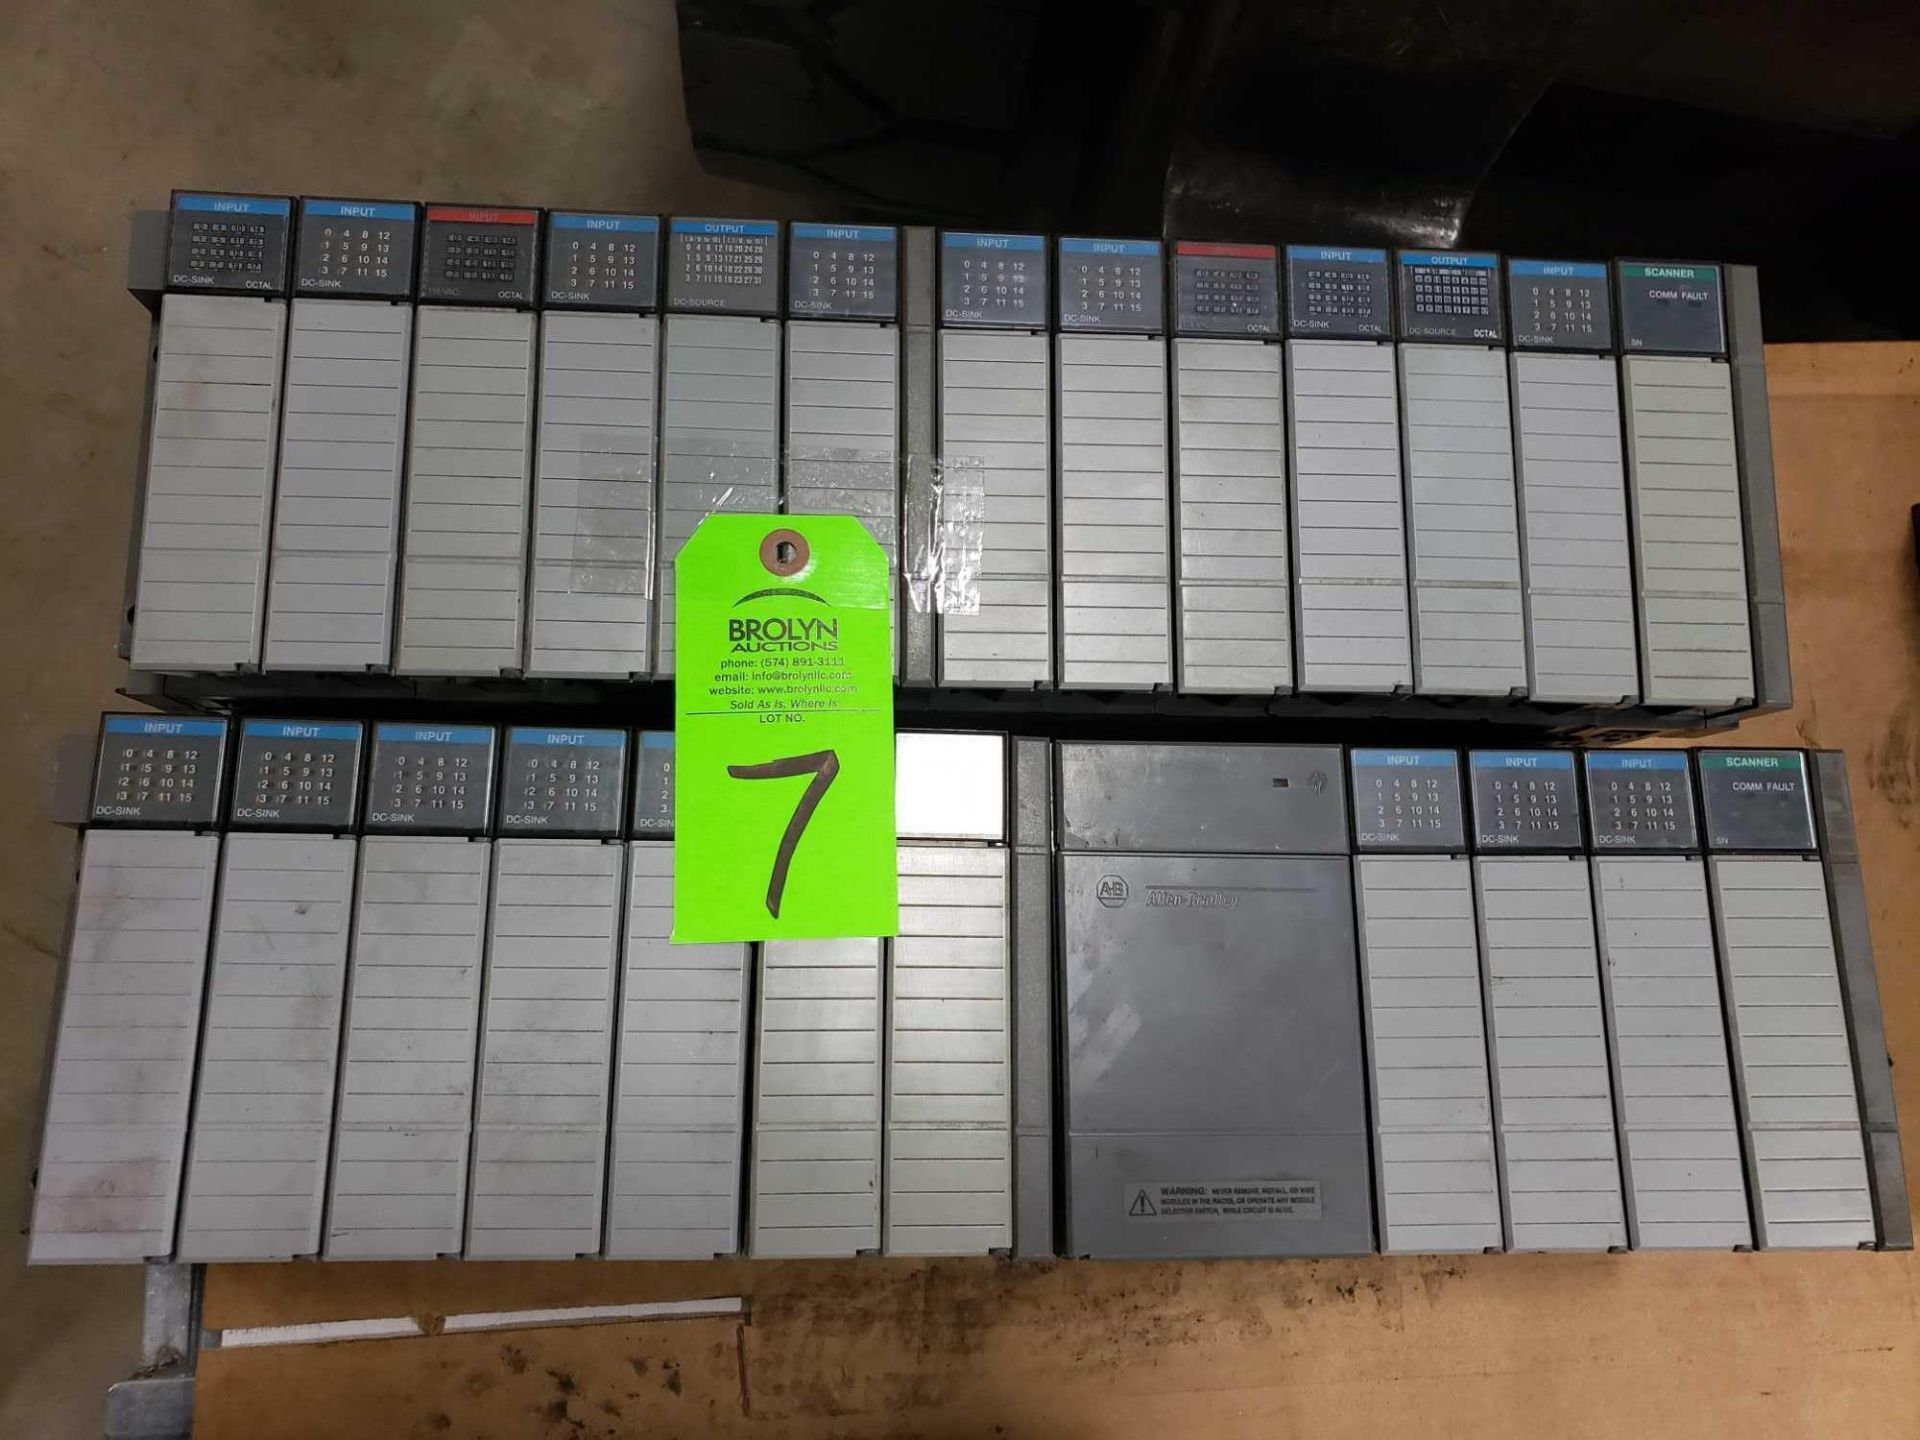 Qty 2 - Allen Bradley SLC500 racks with cards as pictured.